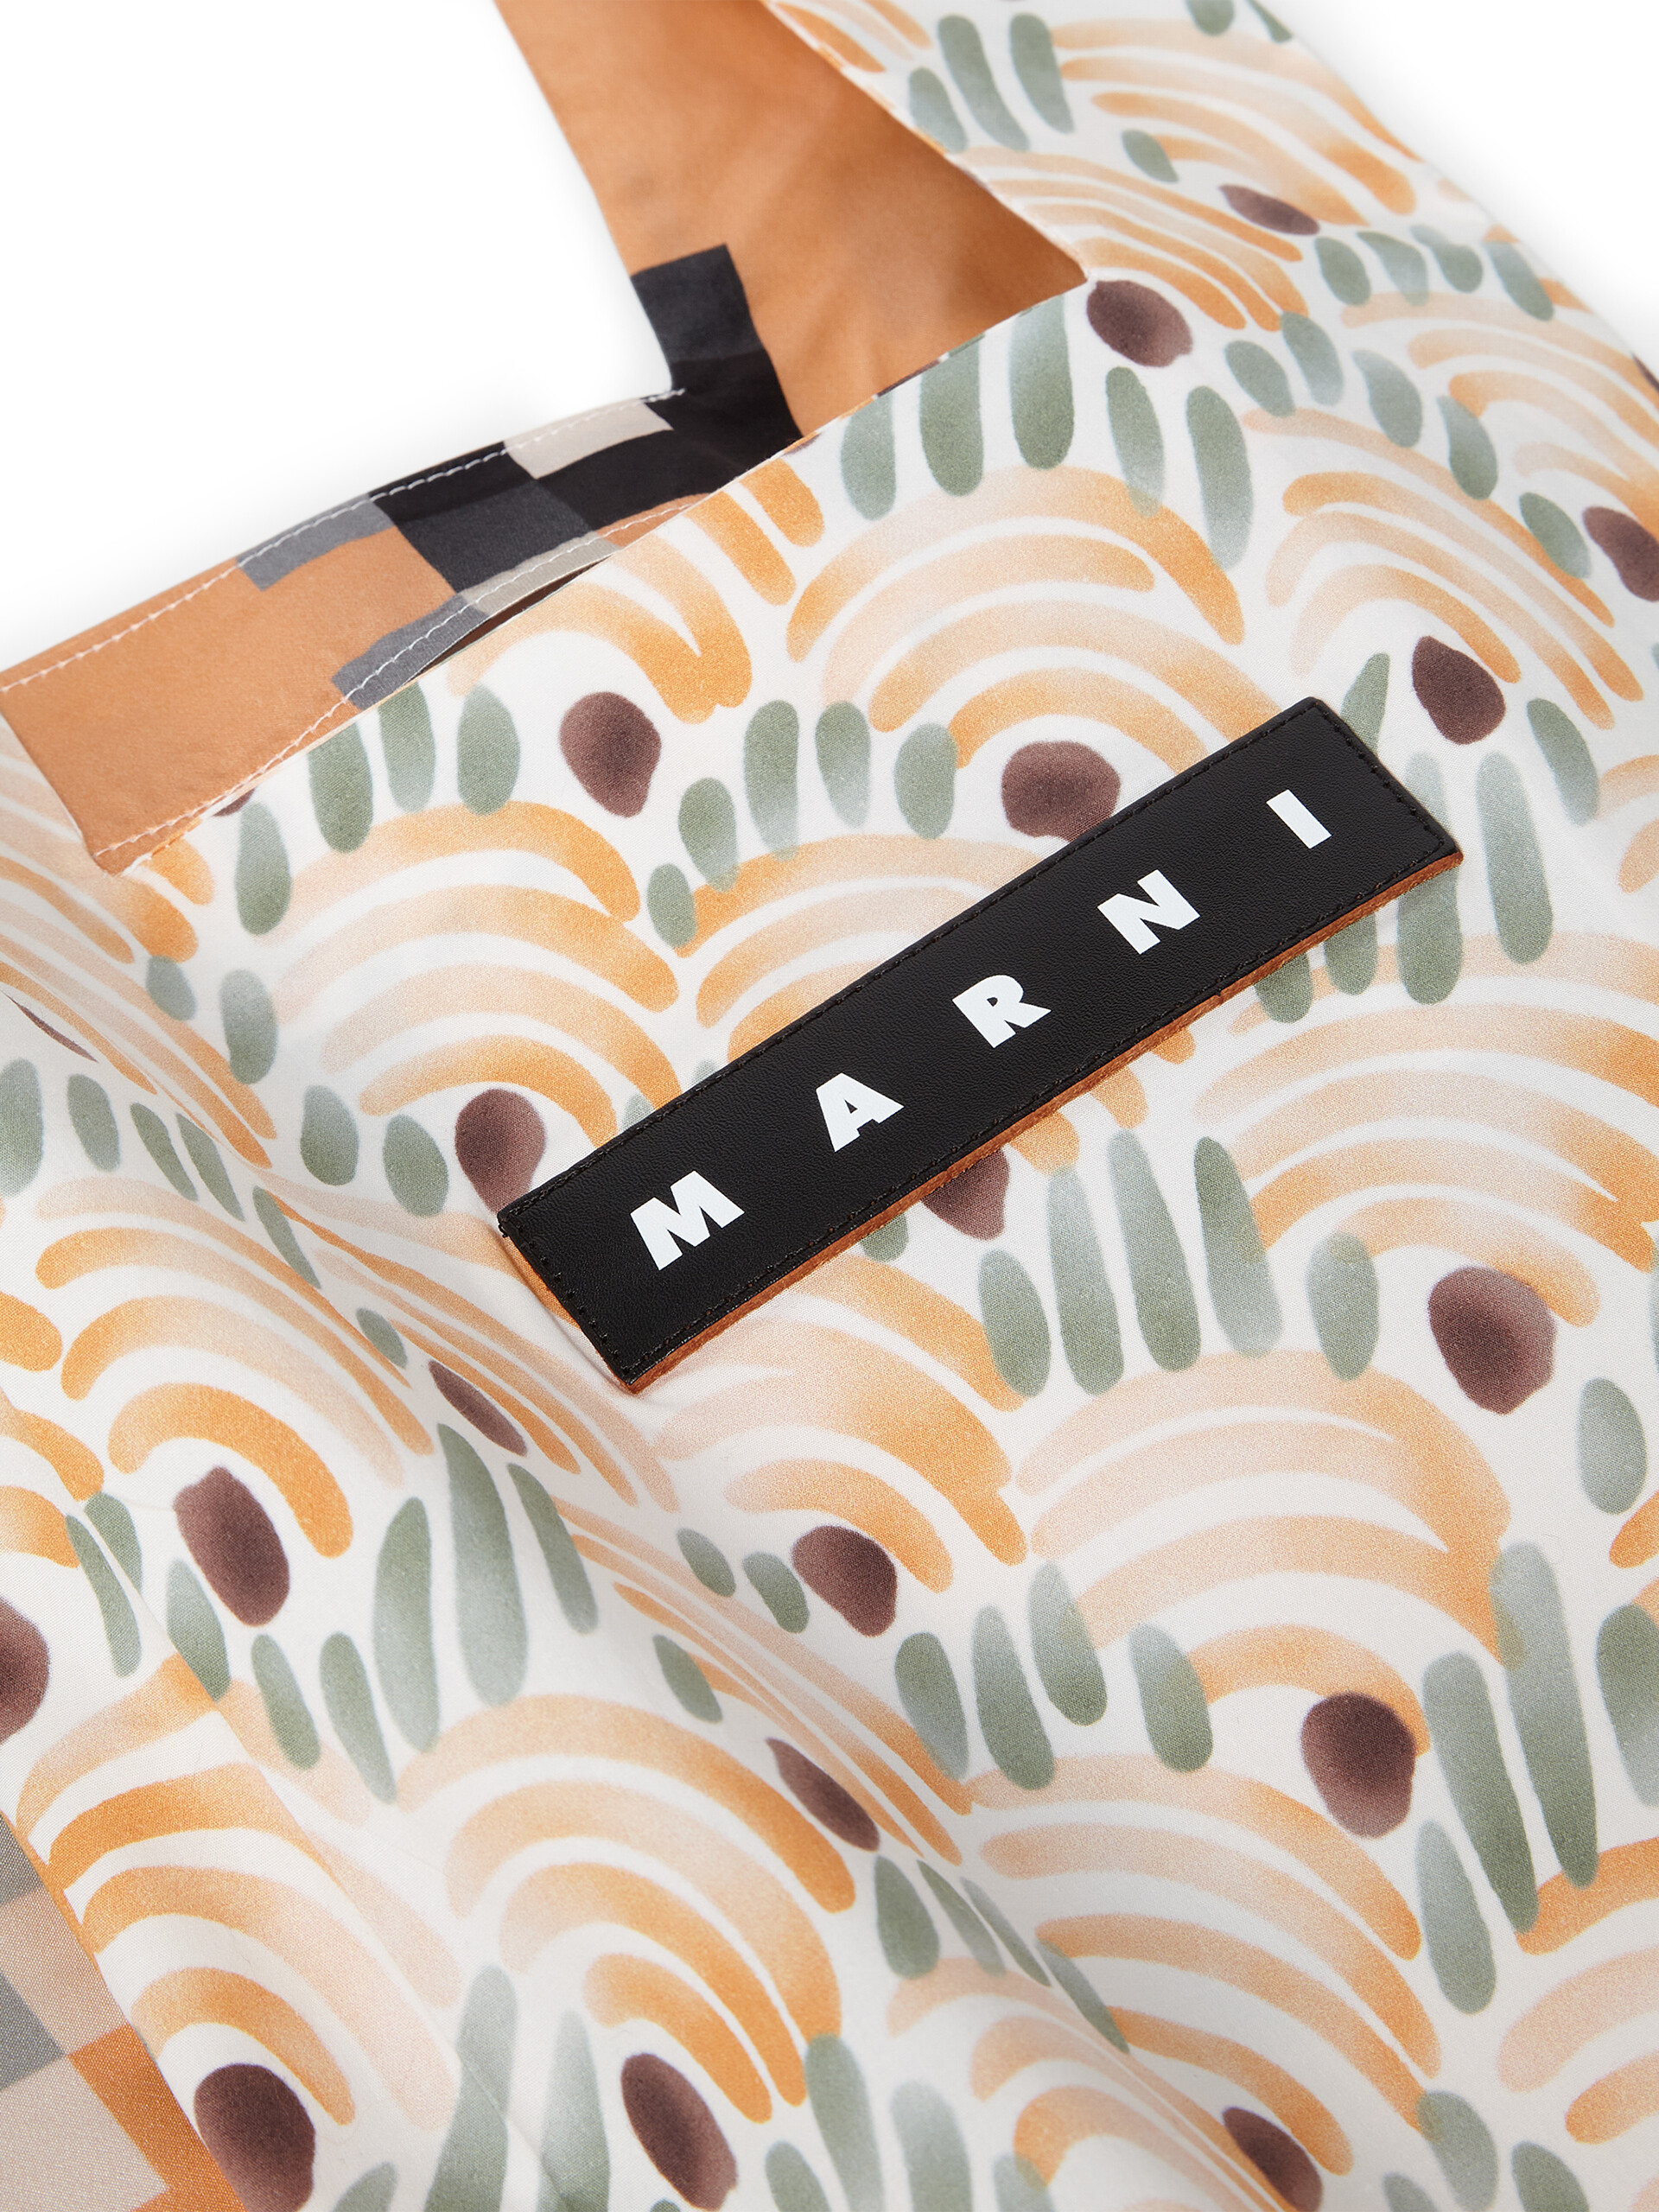 MARNI MARKET cotton shopping bag with abstract and pixel print - Bags - Image 4